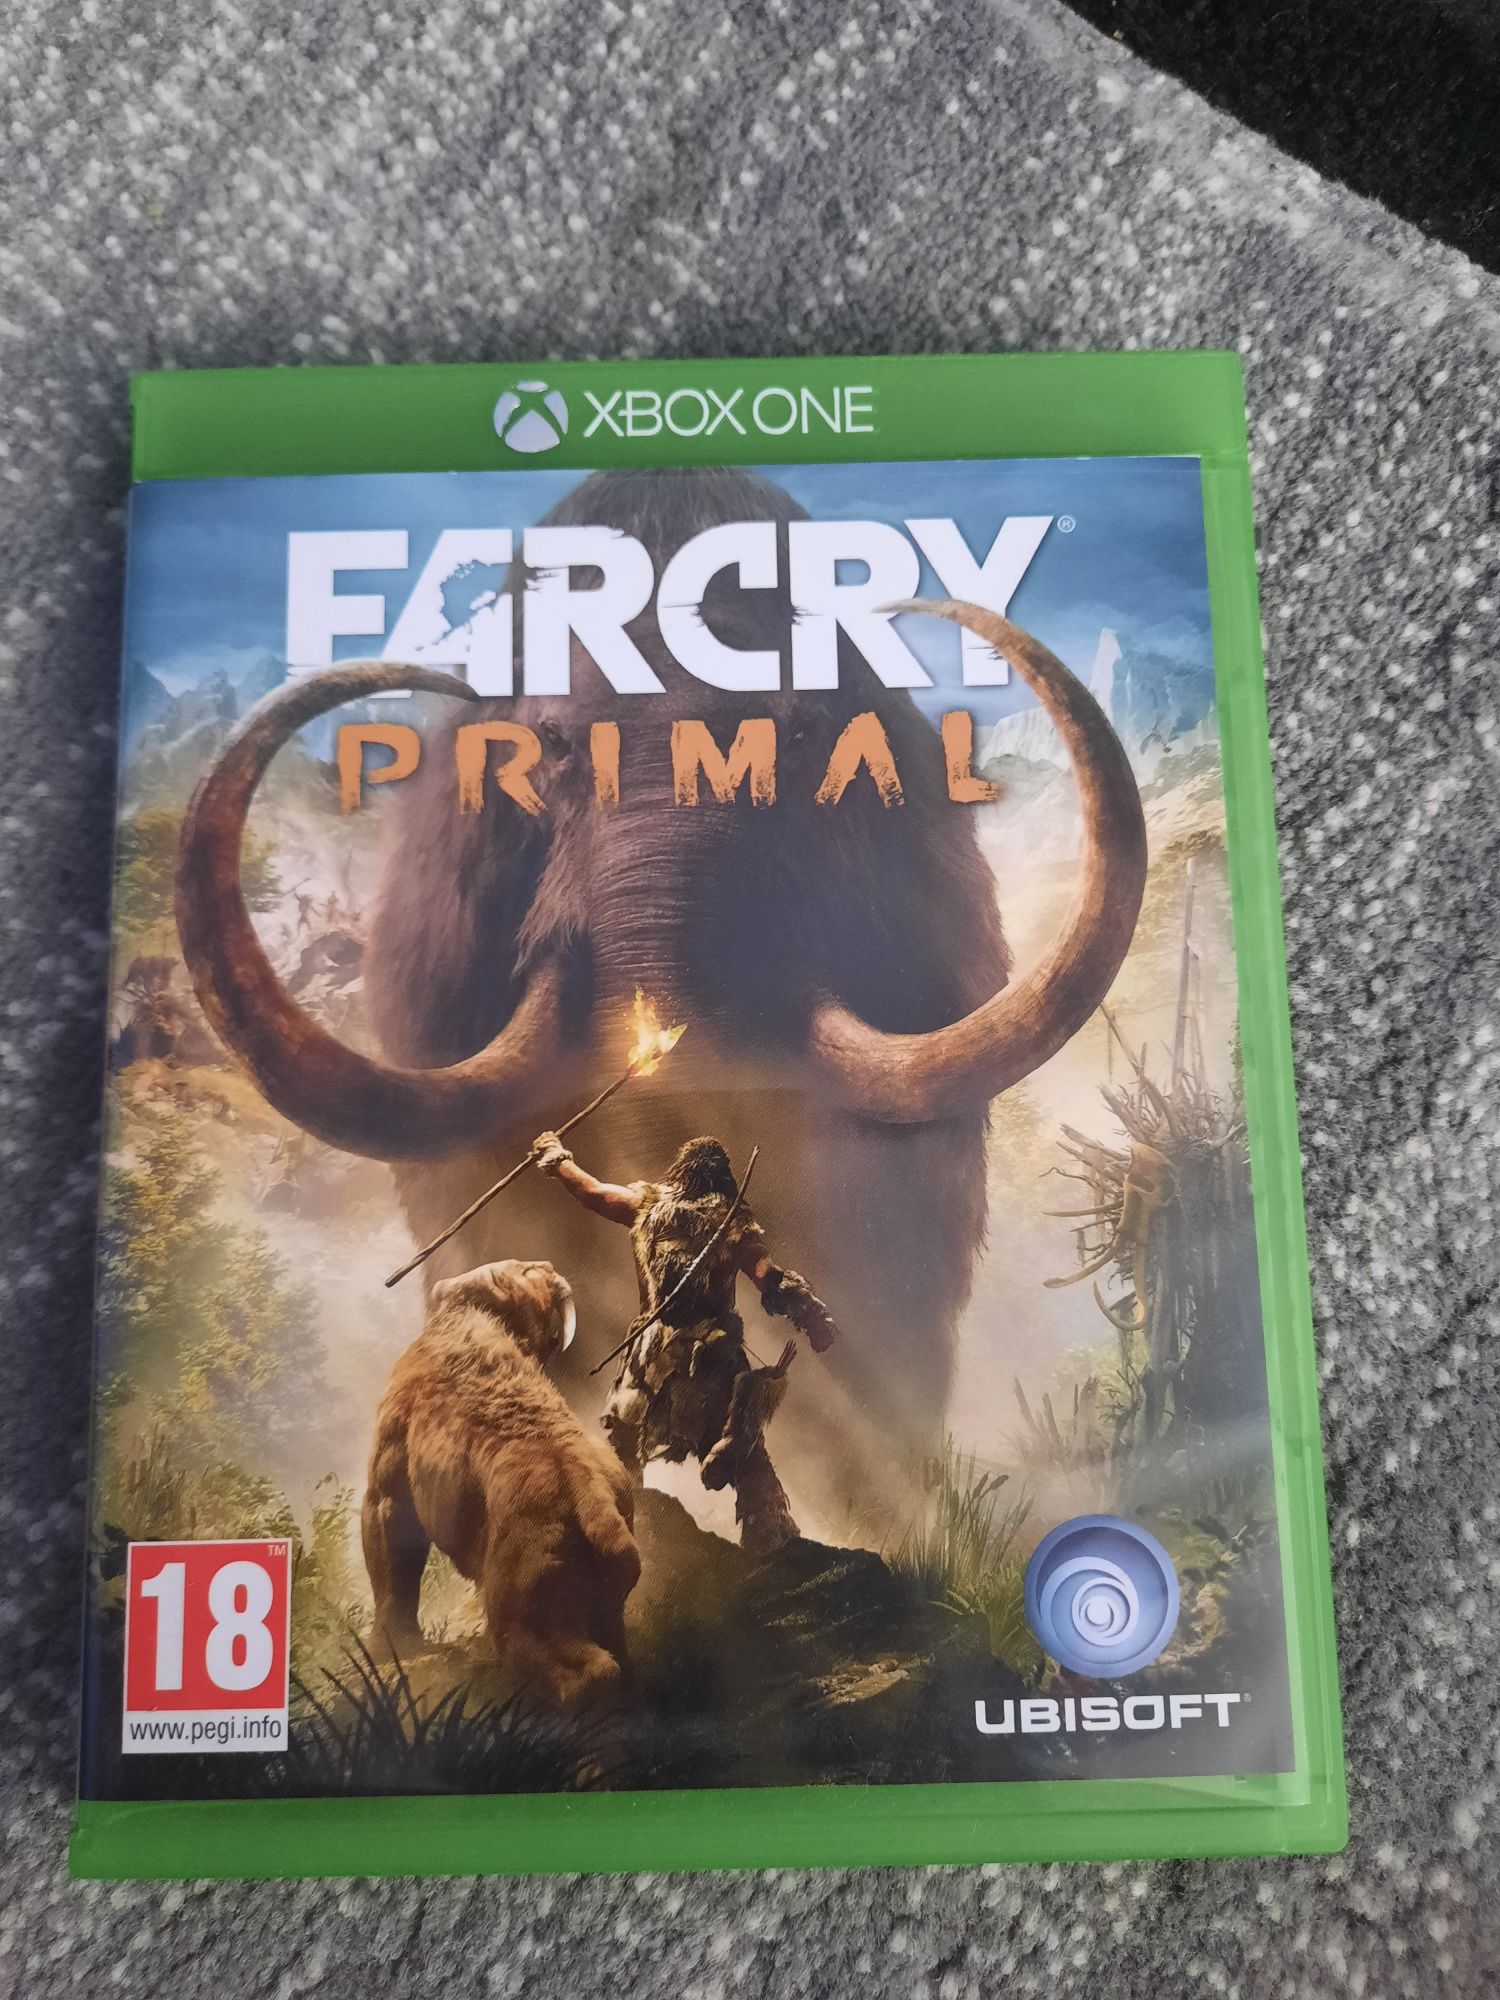 Vand Farcry primal